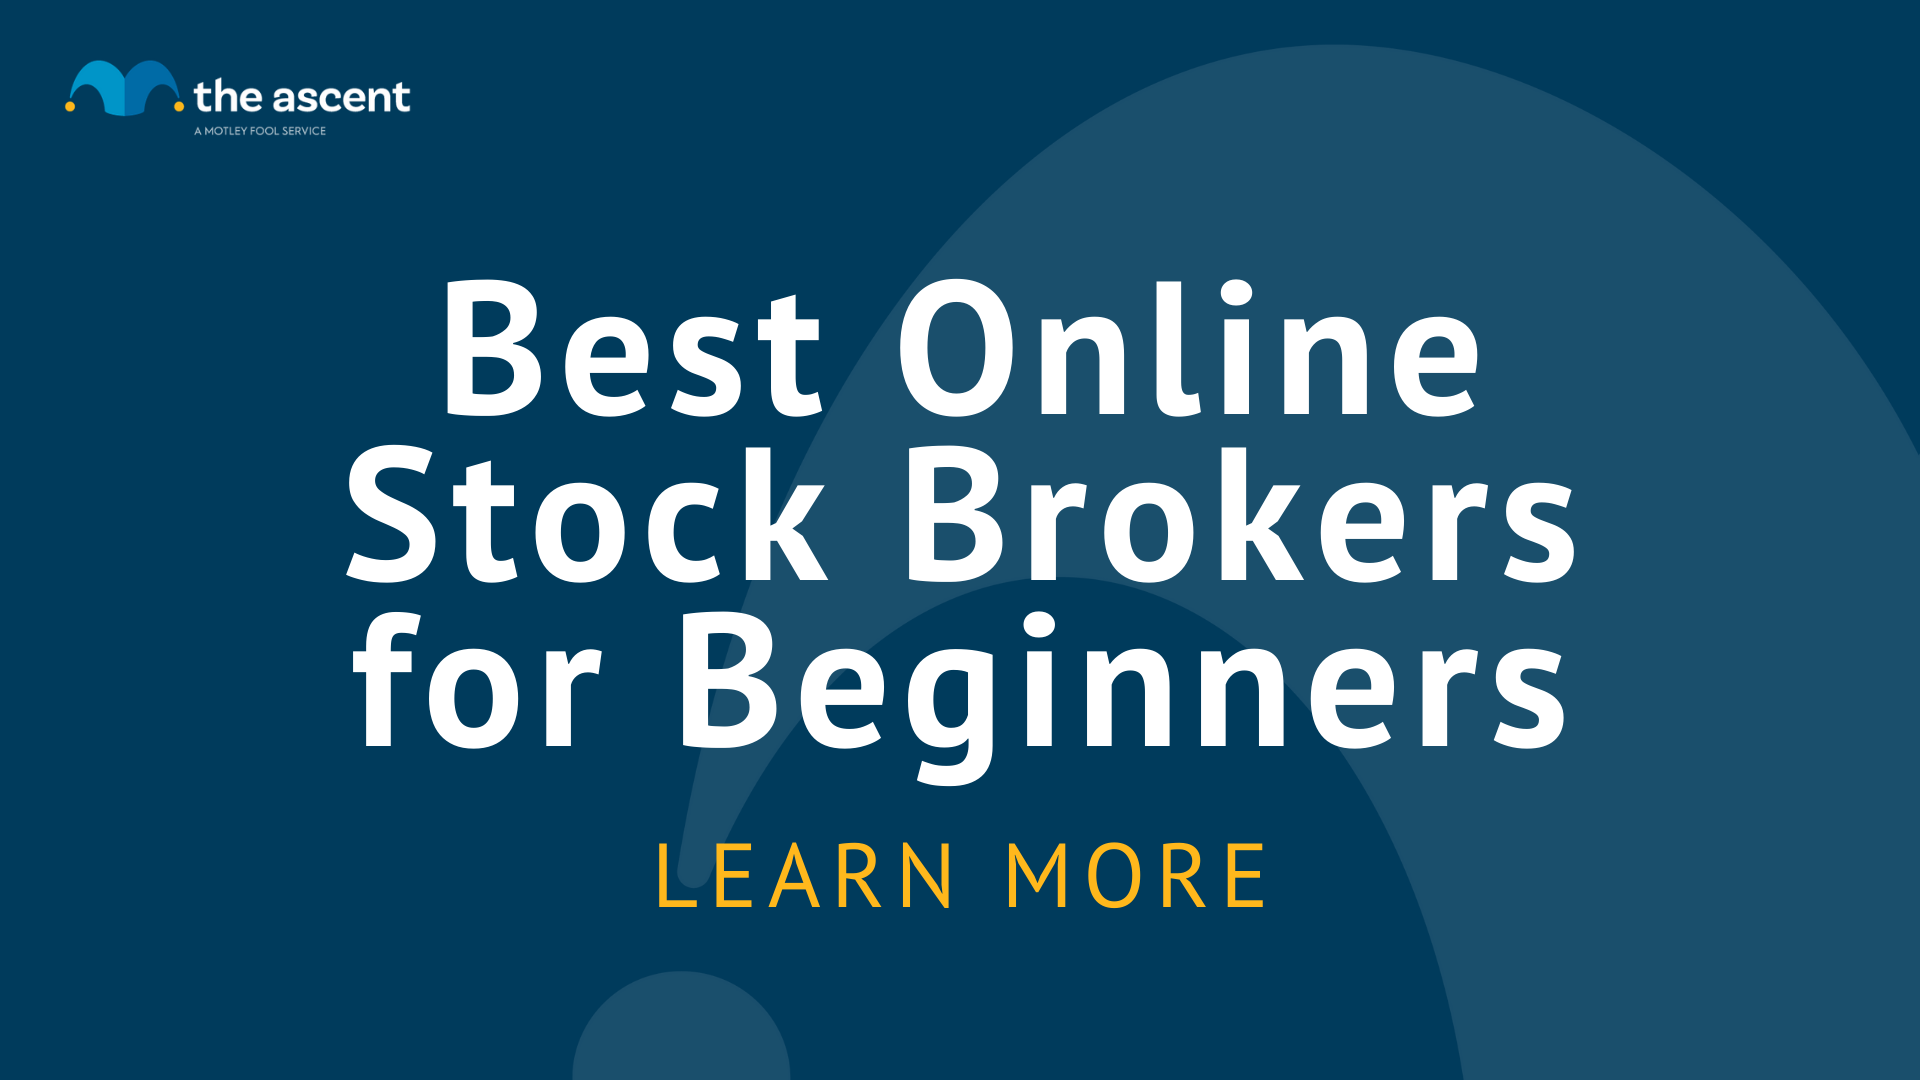 Best Online Stock Brokers for Beginners for Feb 2023 The Motley Fool